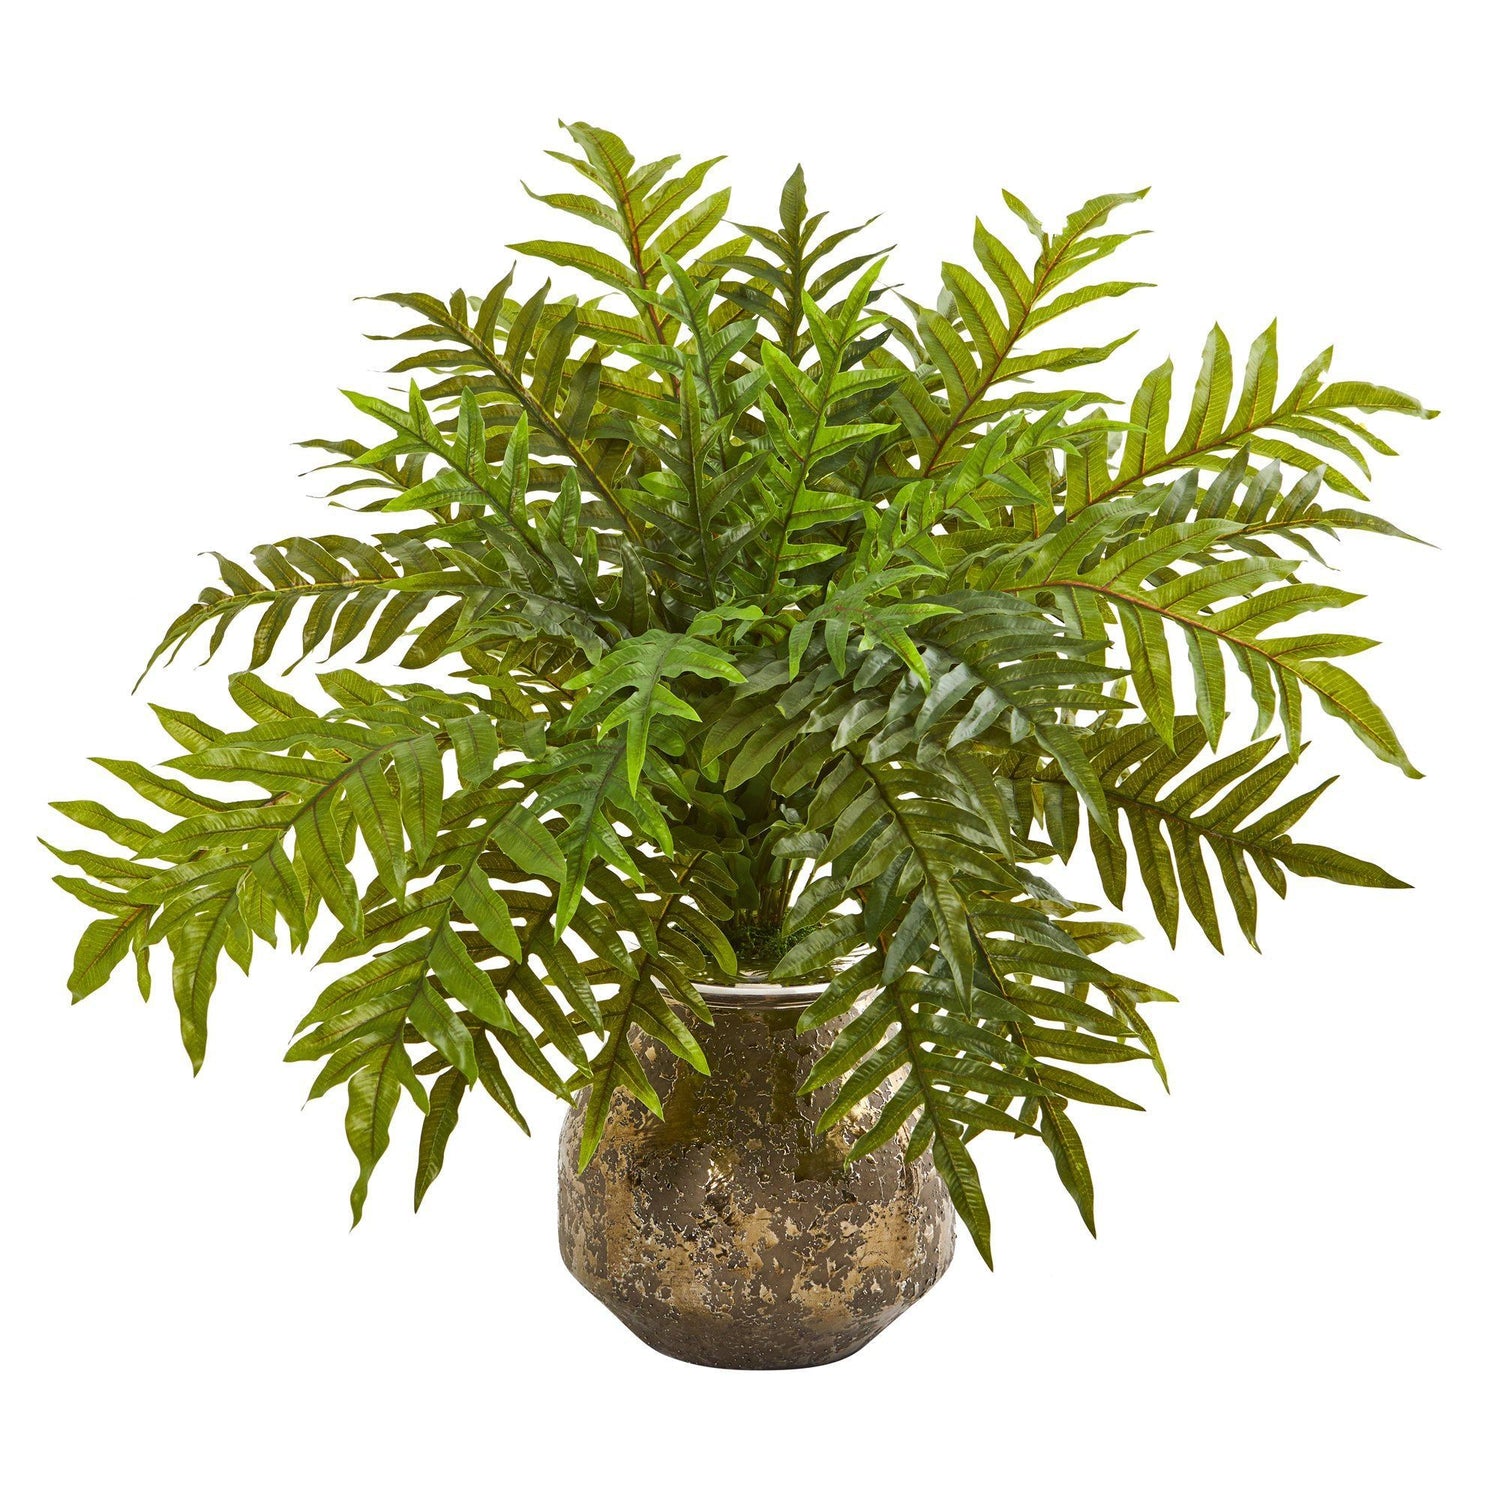 24” Hares Foot Fern Artificial Plant in Vase (Real Touch)